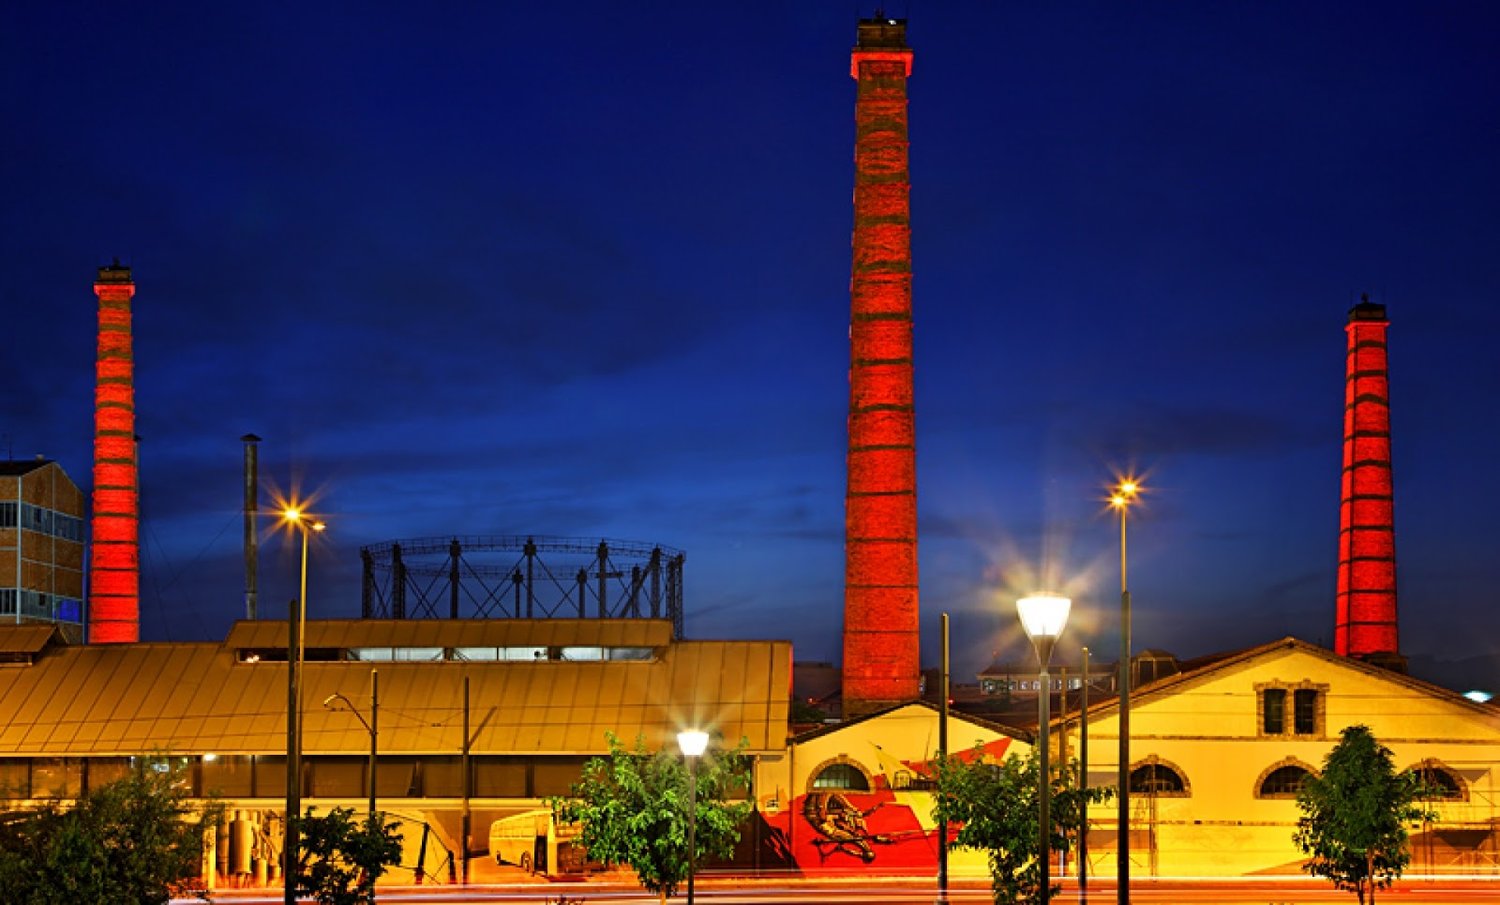 The view of Technopolis at night. Source:  AthensGlance